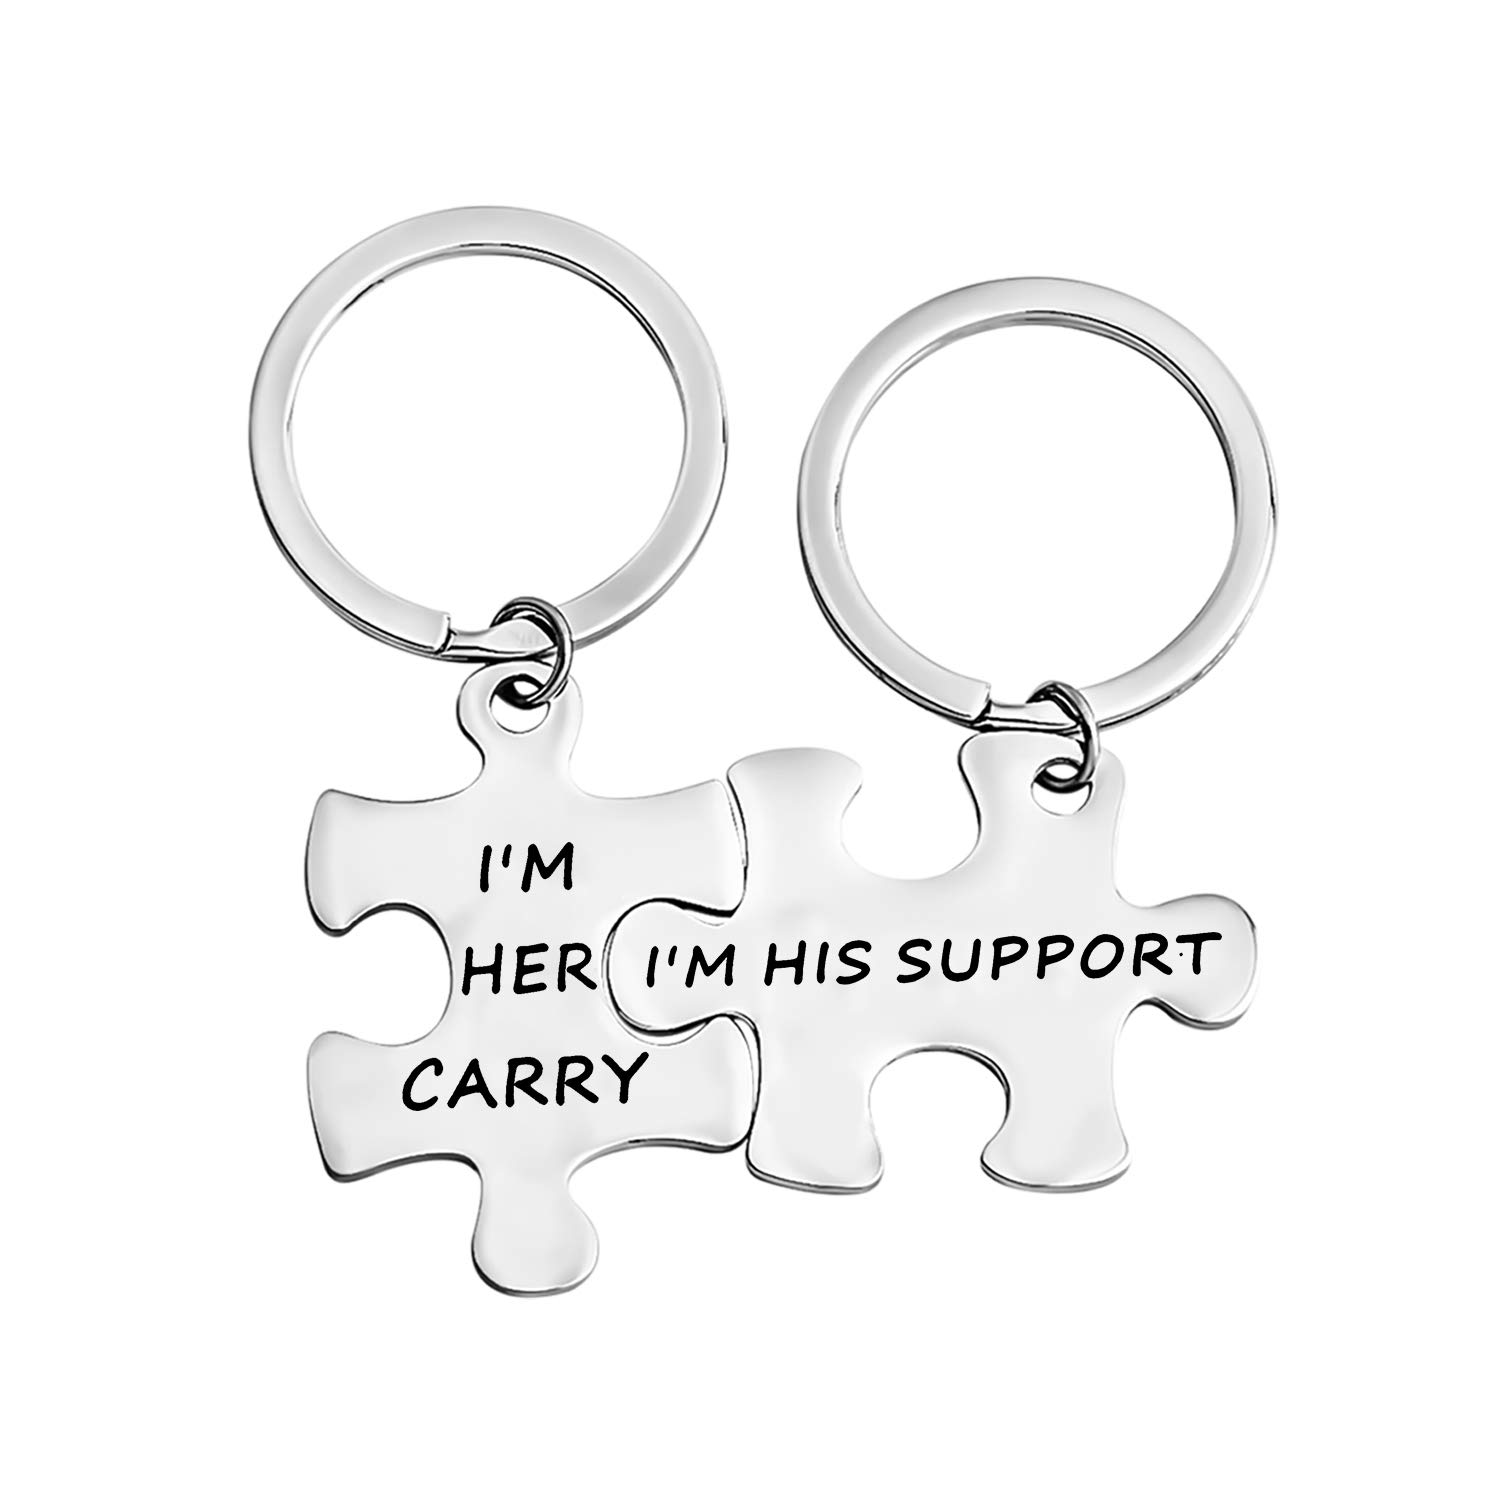 BNQL Gamer Keychain Game Lover Gifts lnspired Support and Carry Keychain Set, silber, Large von BNQL